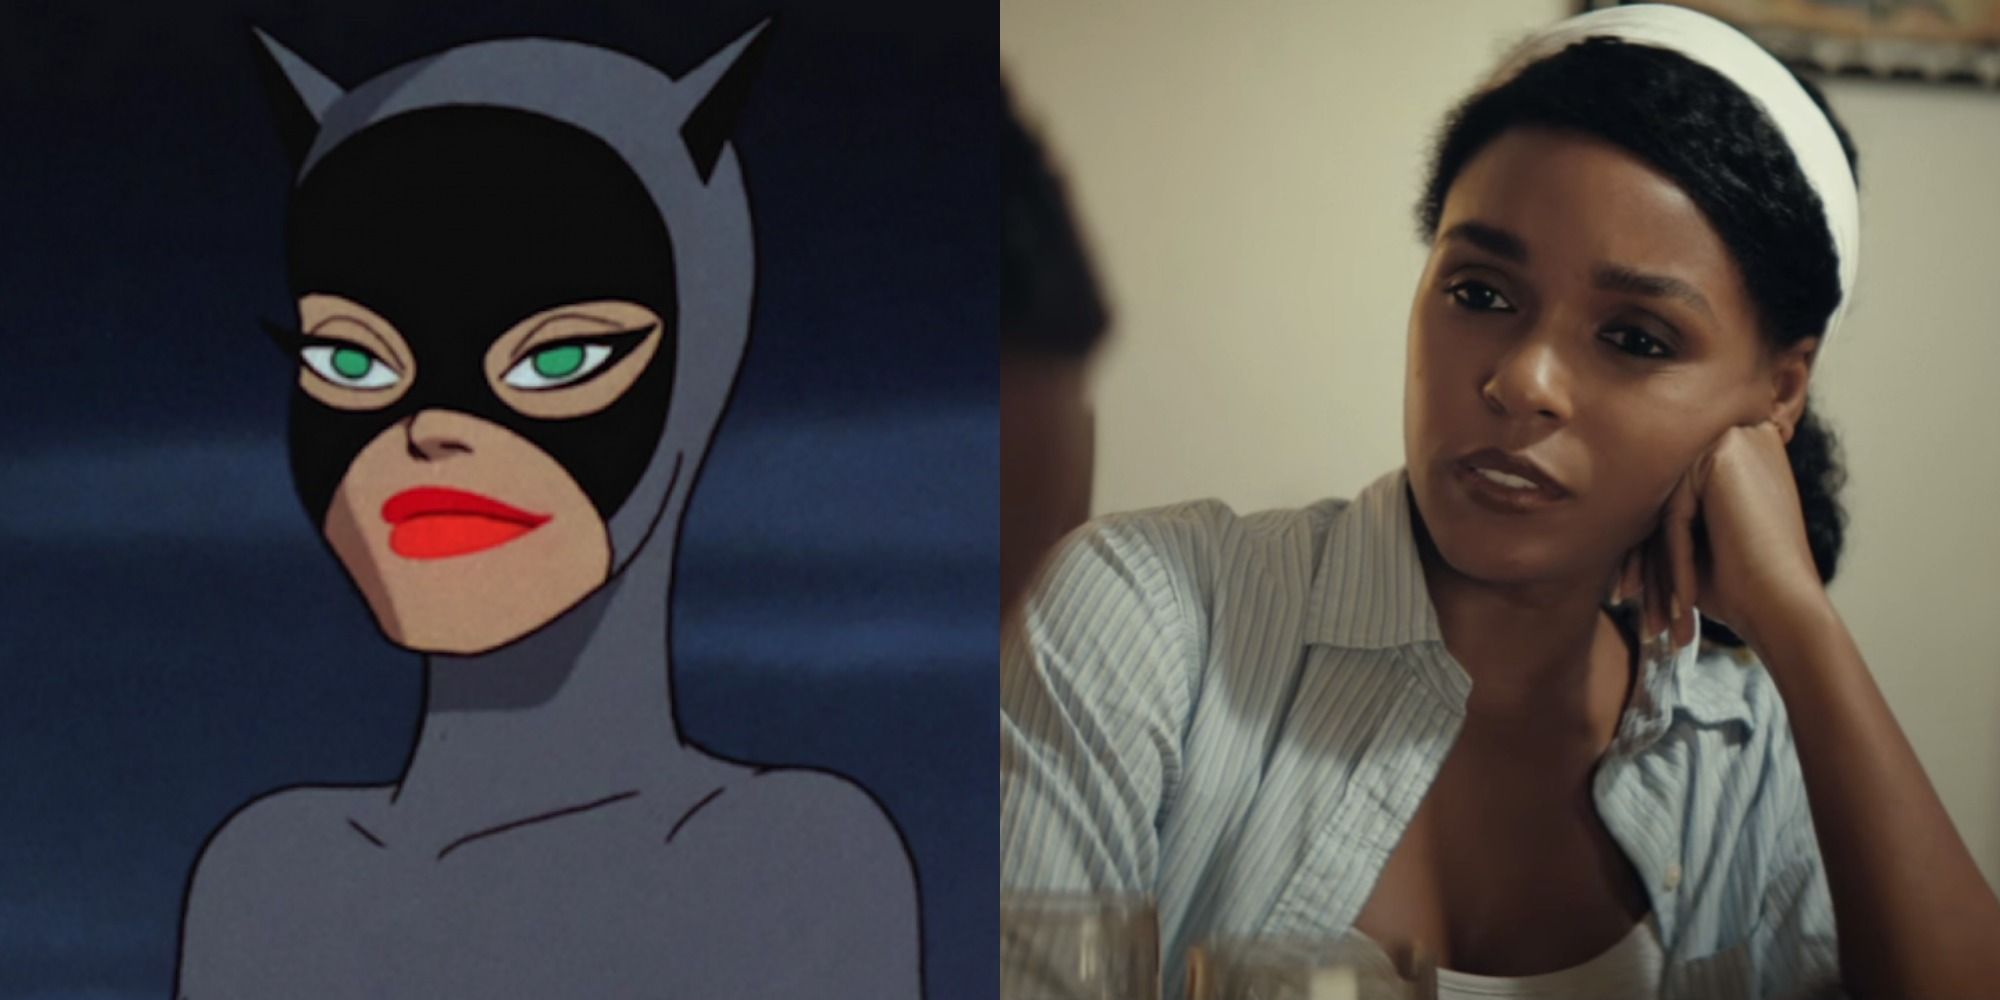 Split image of Catwoman in Batman: The Animated Series and Janelle Monae in Moonlight